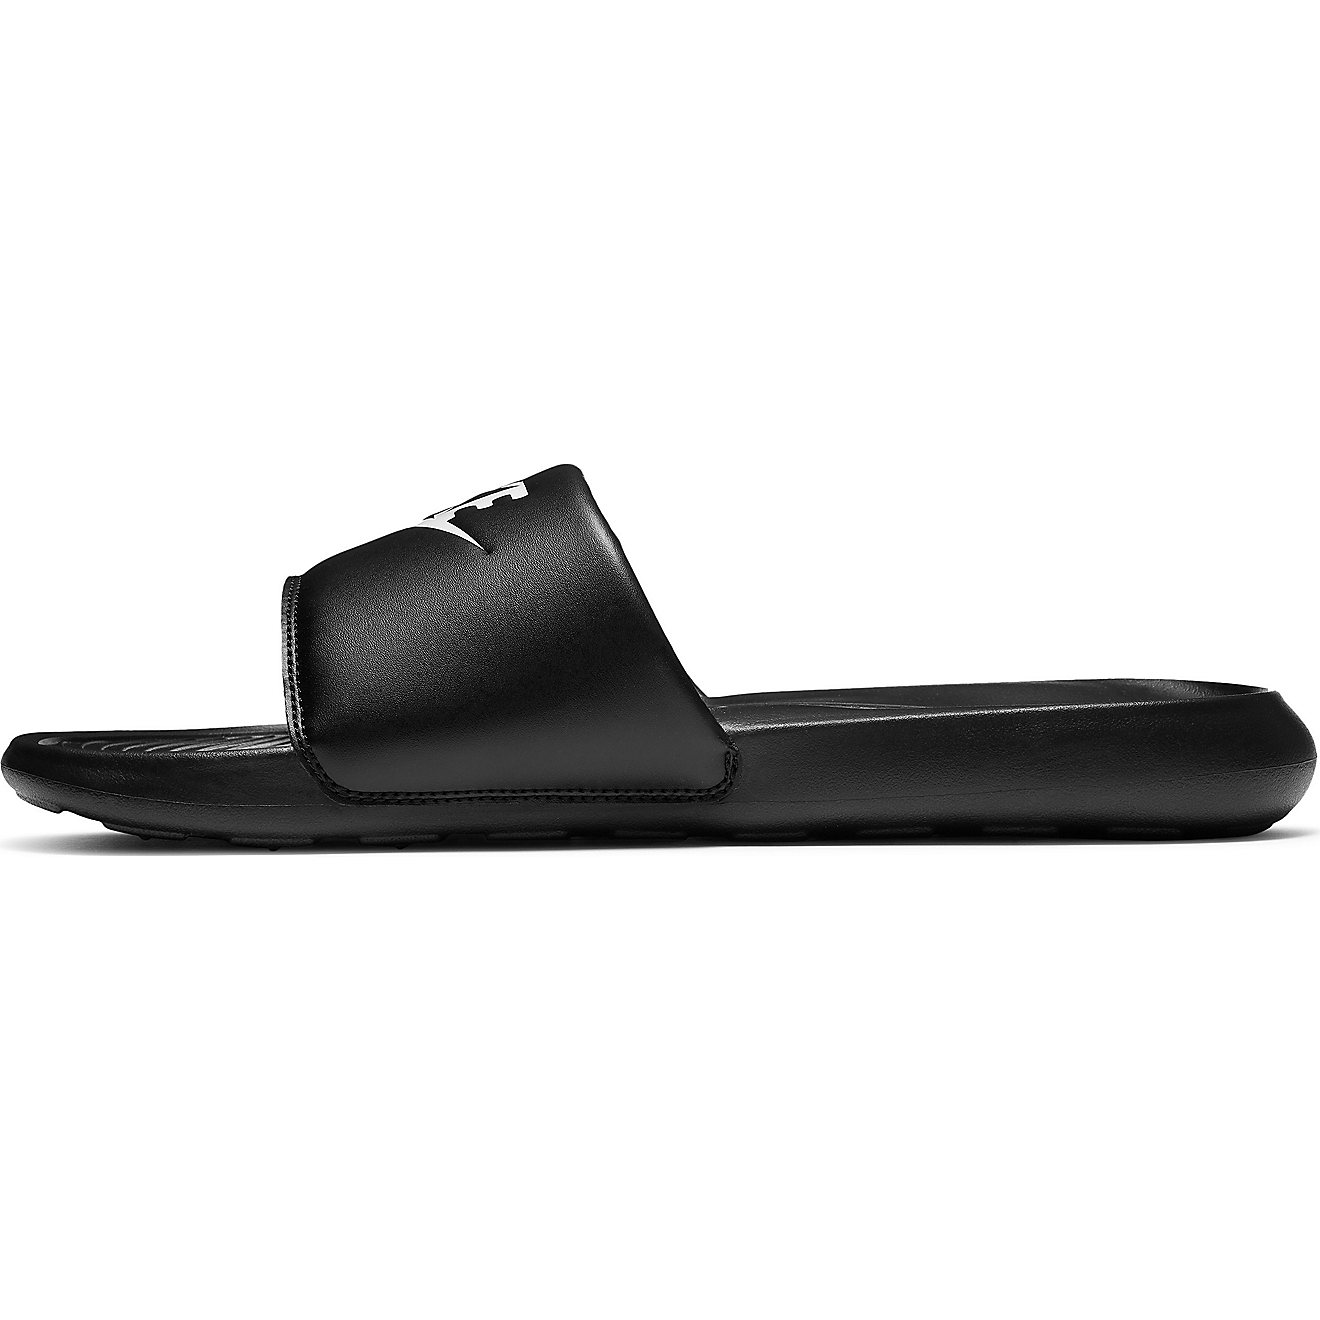 Nike Men's Victori One Slides | Free Shipping at Academy